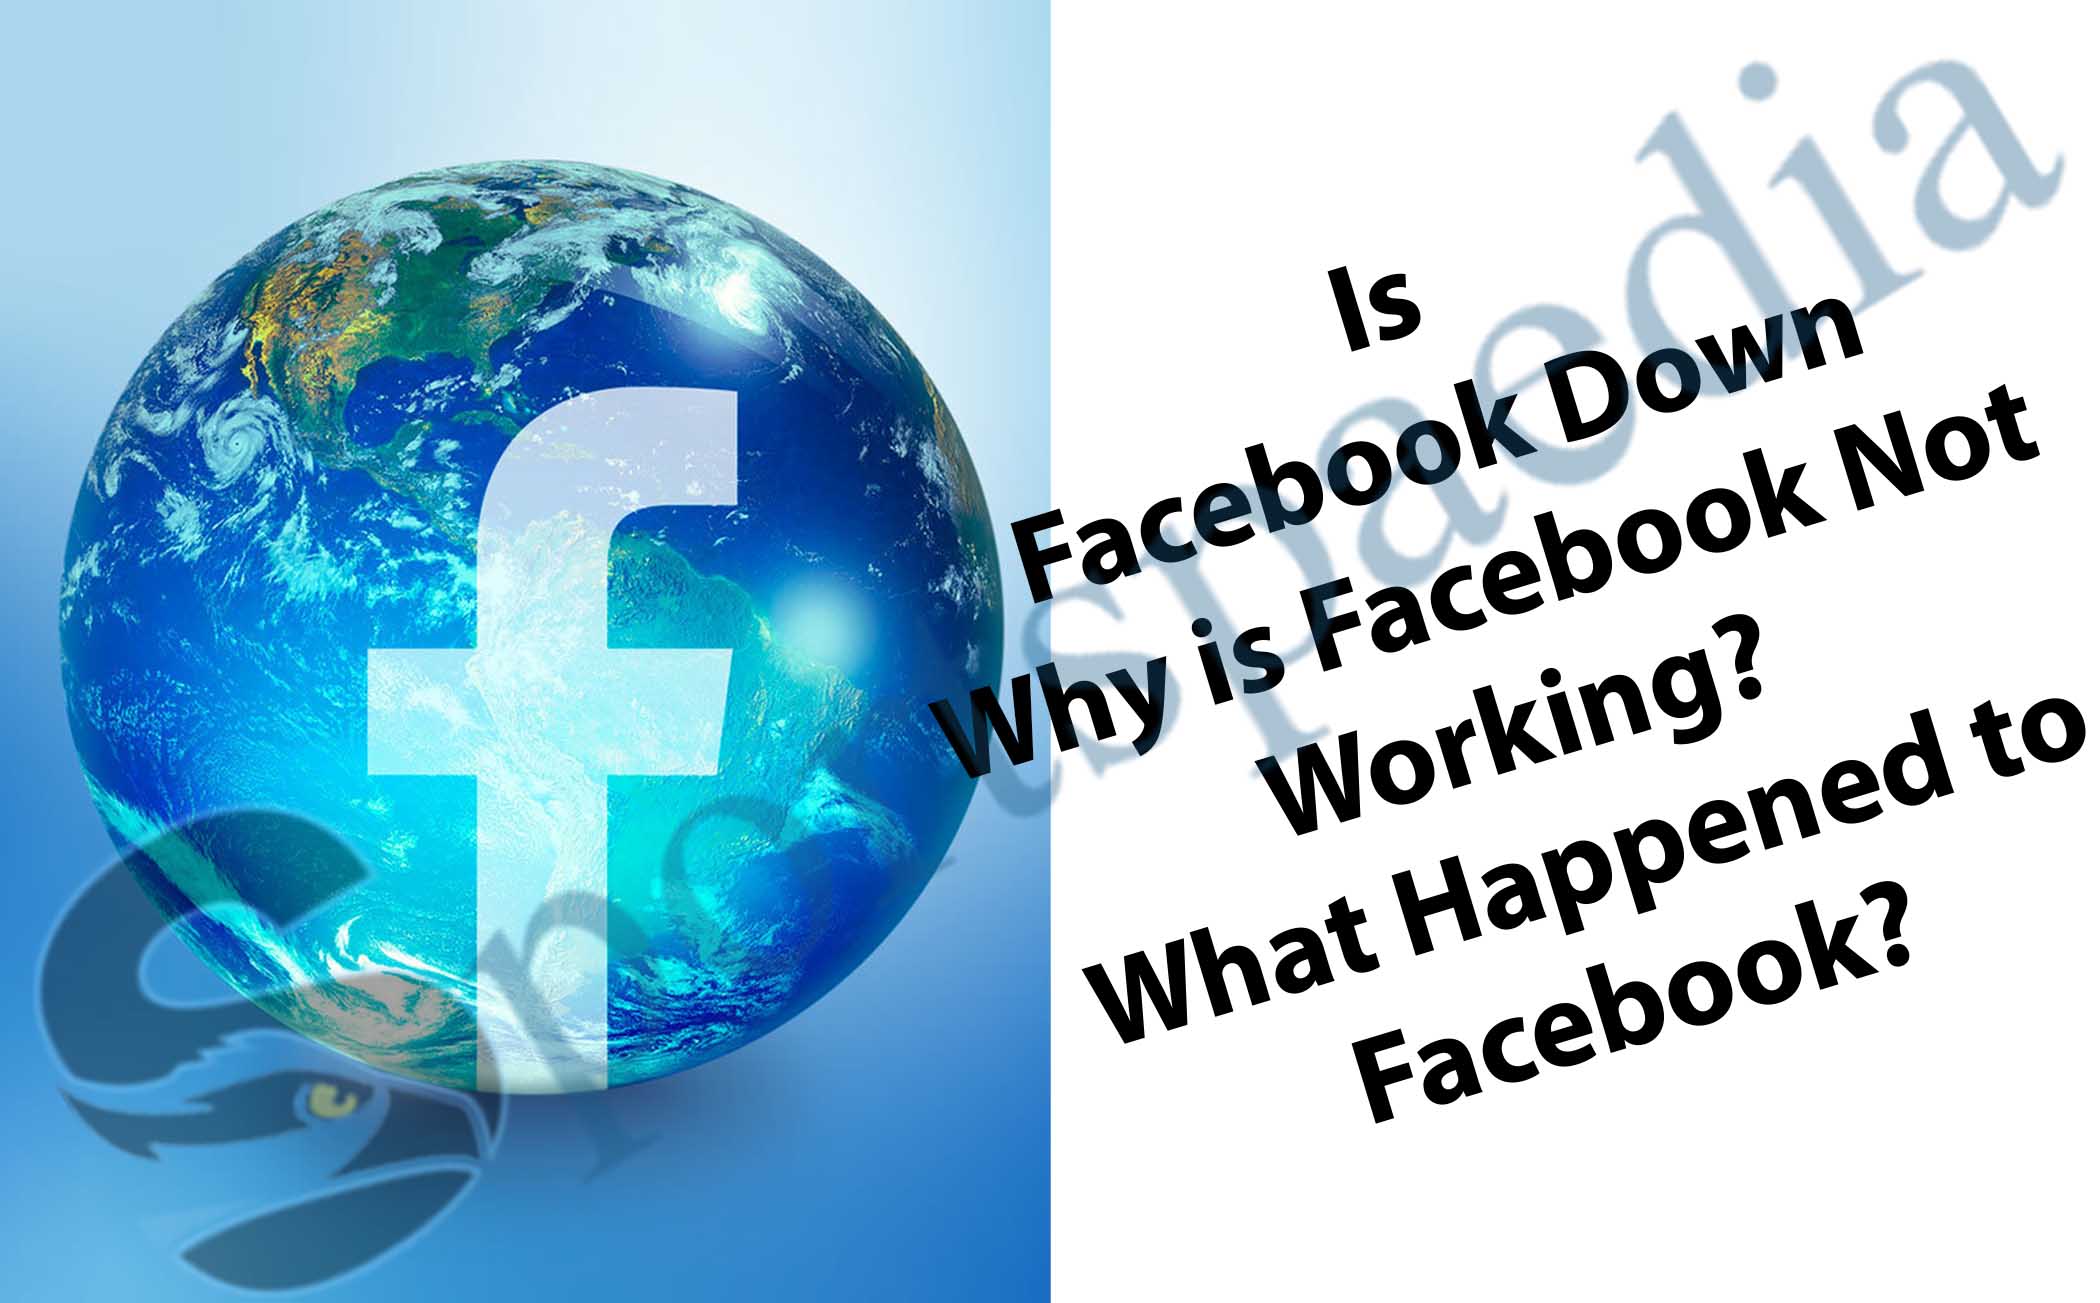  Is Facebook Down - Why is Facebook Not Working? - What Happened to Facebook?